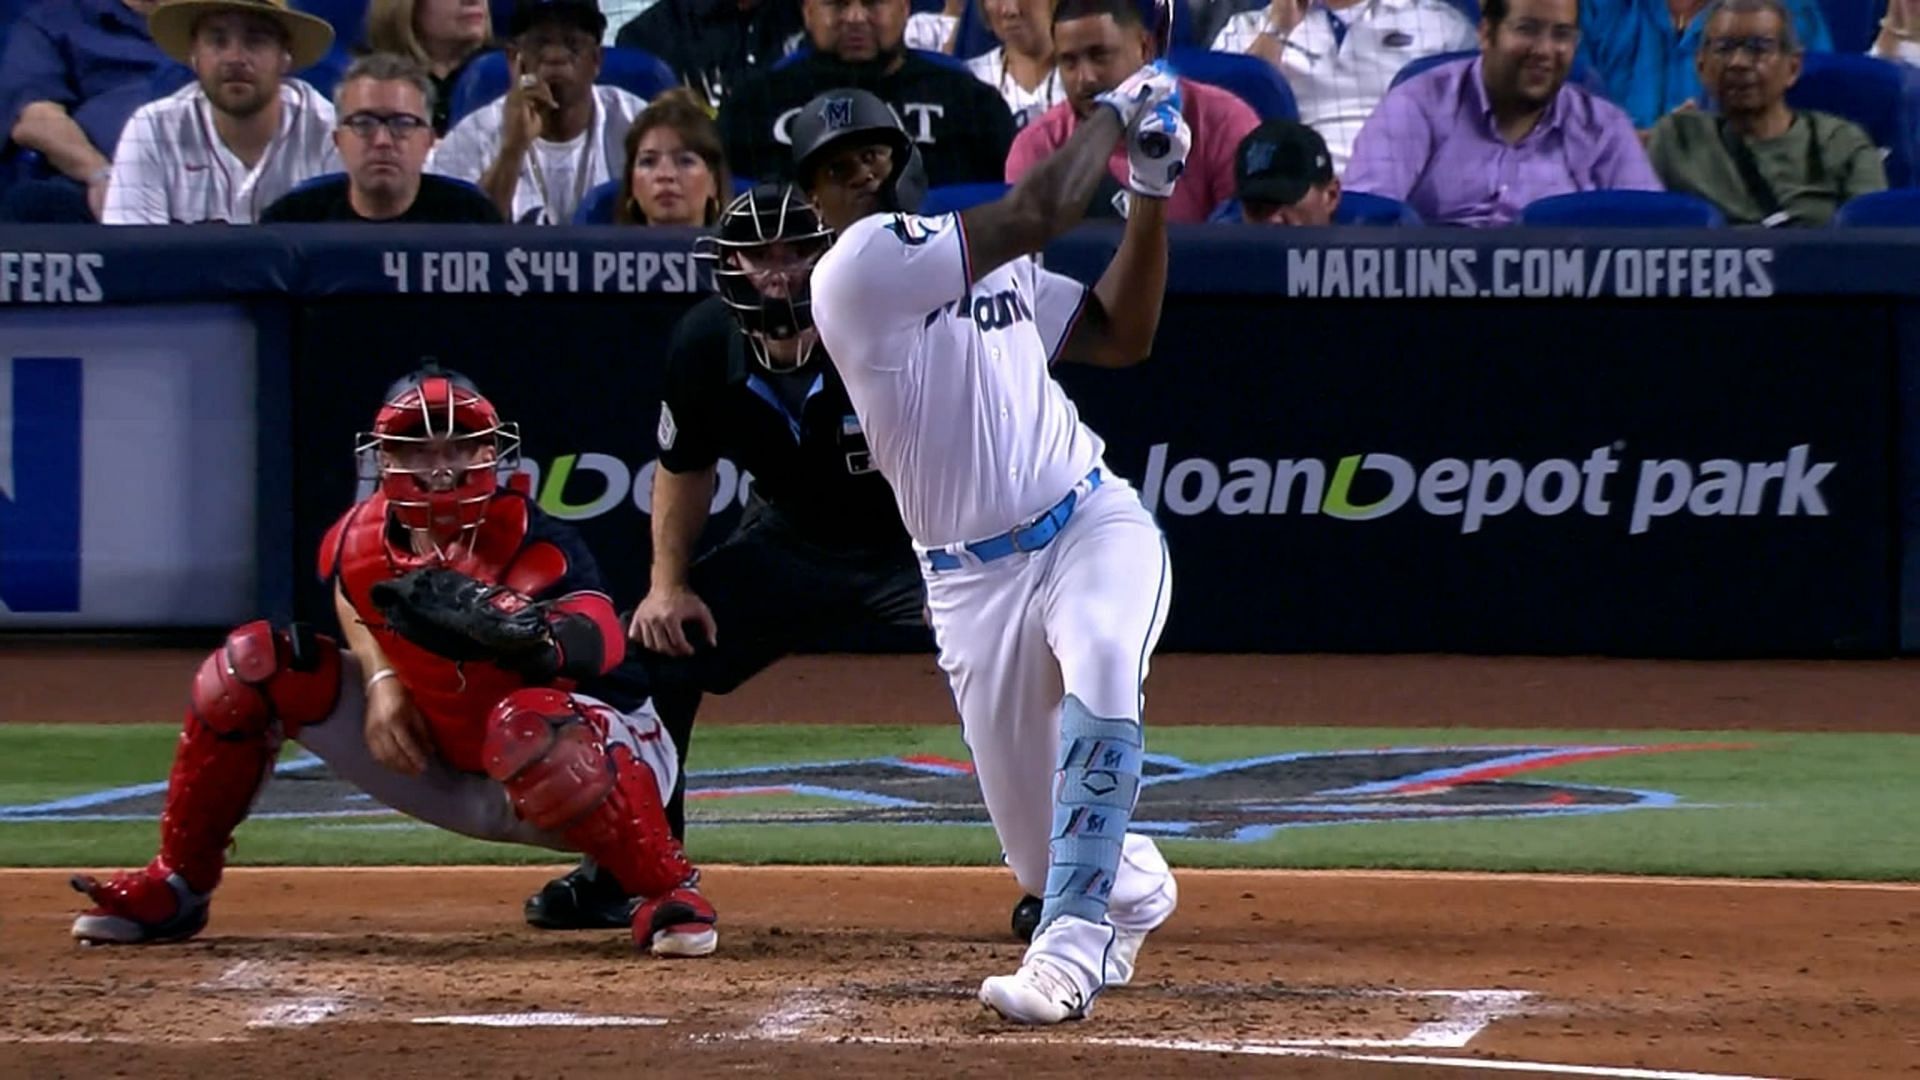 Jorge Soler hits a bomb at LoanDepot Park in Miami